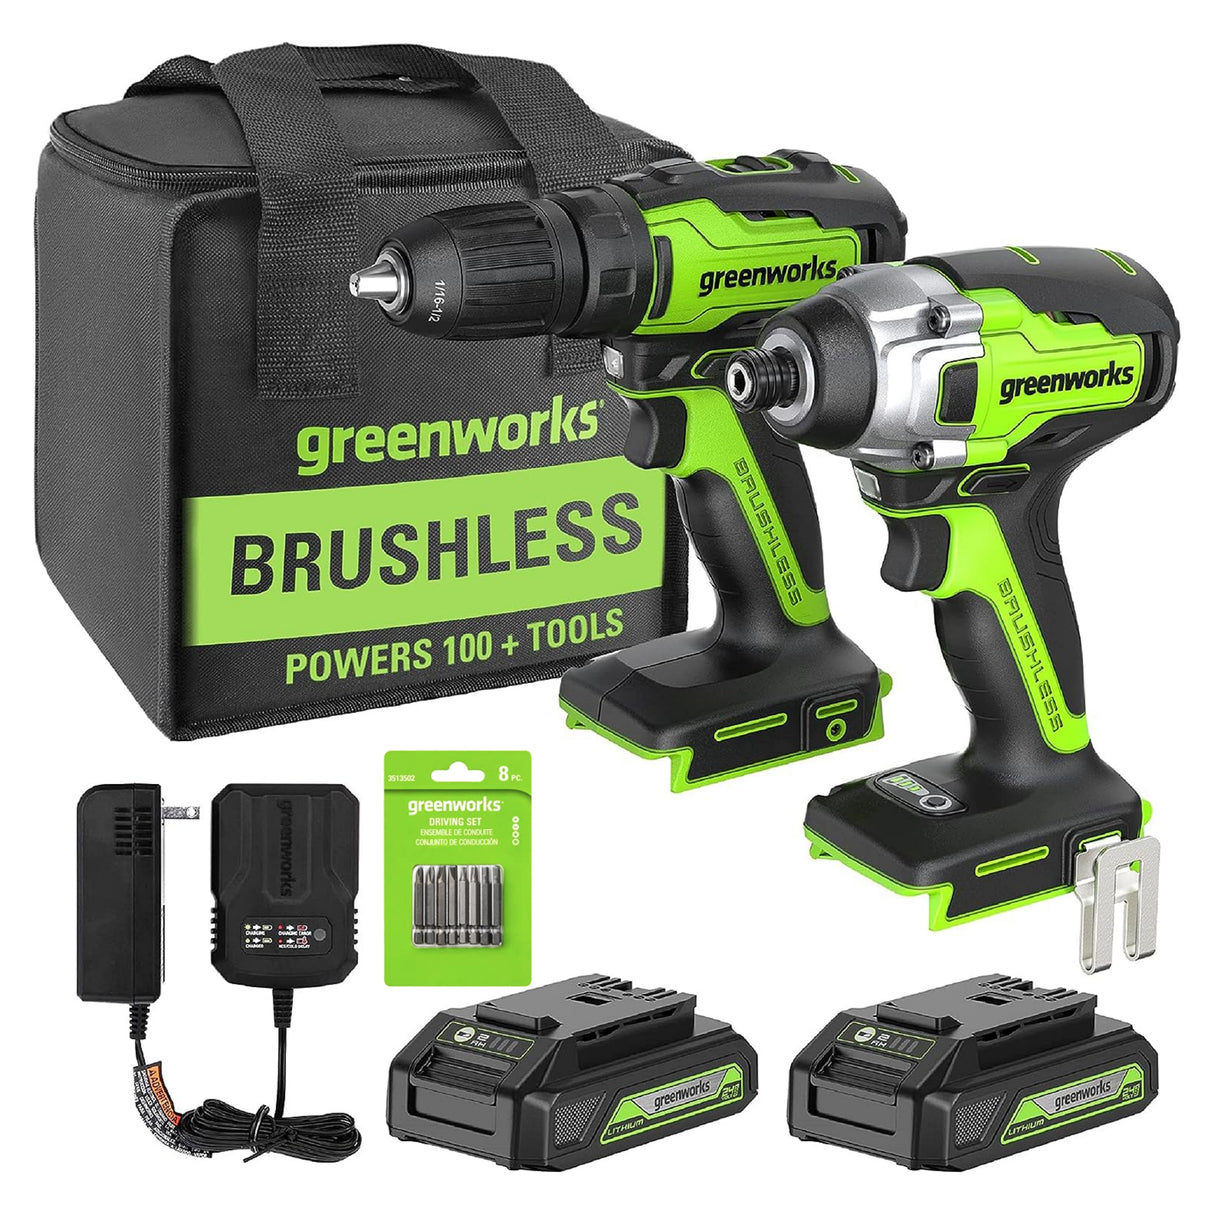 24V Brushless 1/2" Drill/Driver, 1/4" Hex Impact Driver, (2) 2.0Ah Battery & Charger Included Bonus: 8 pc Bit Set